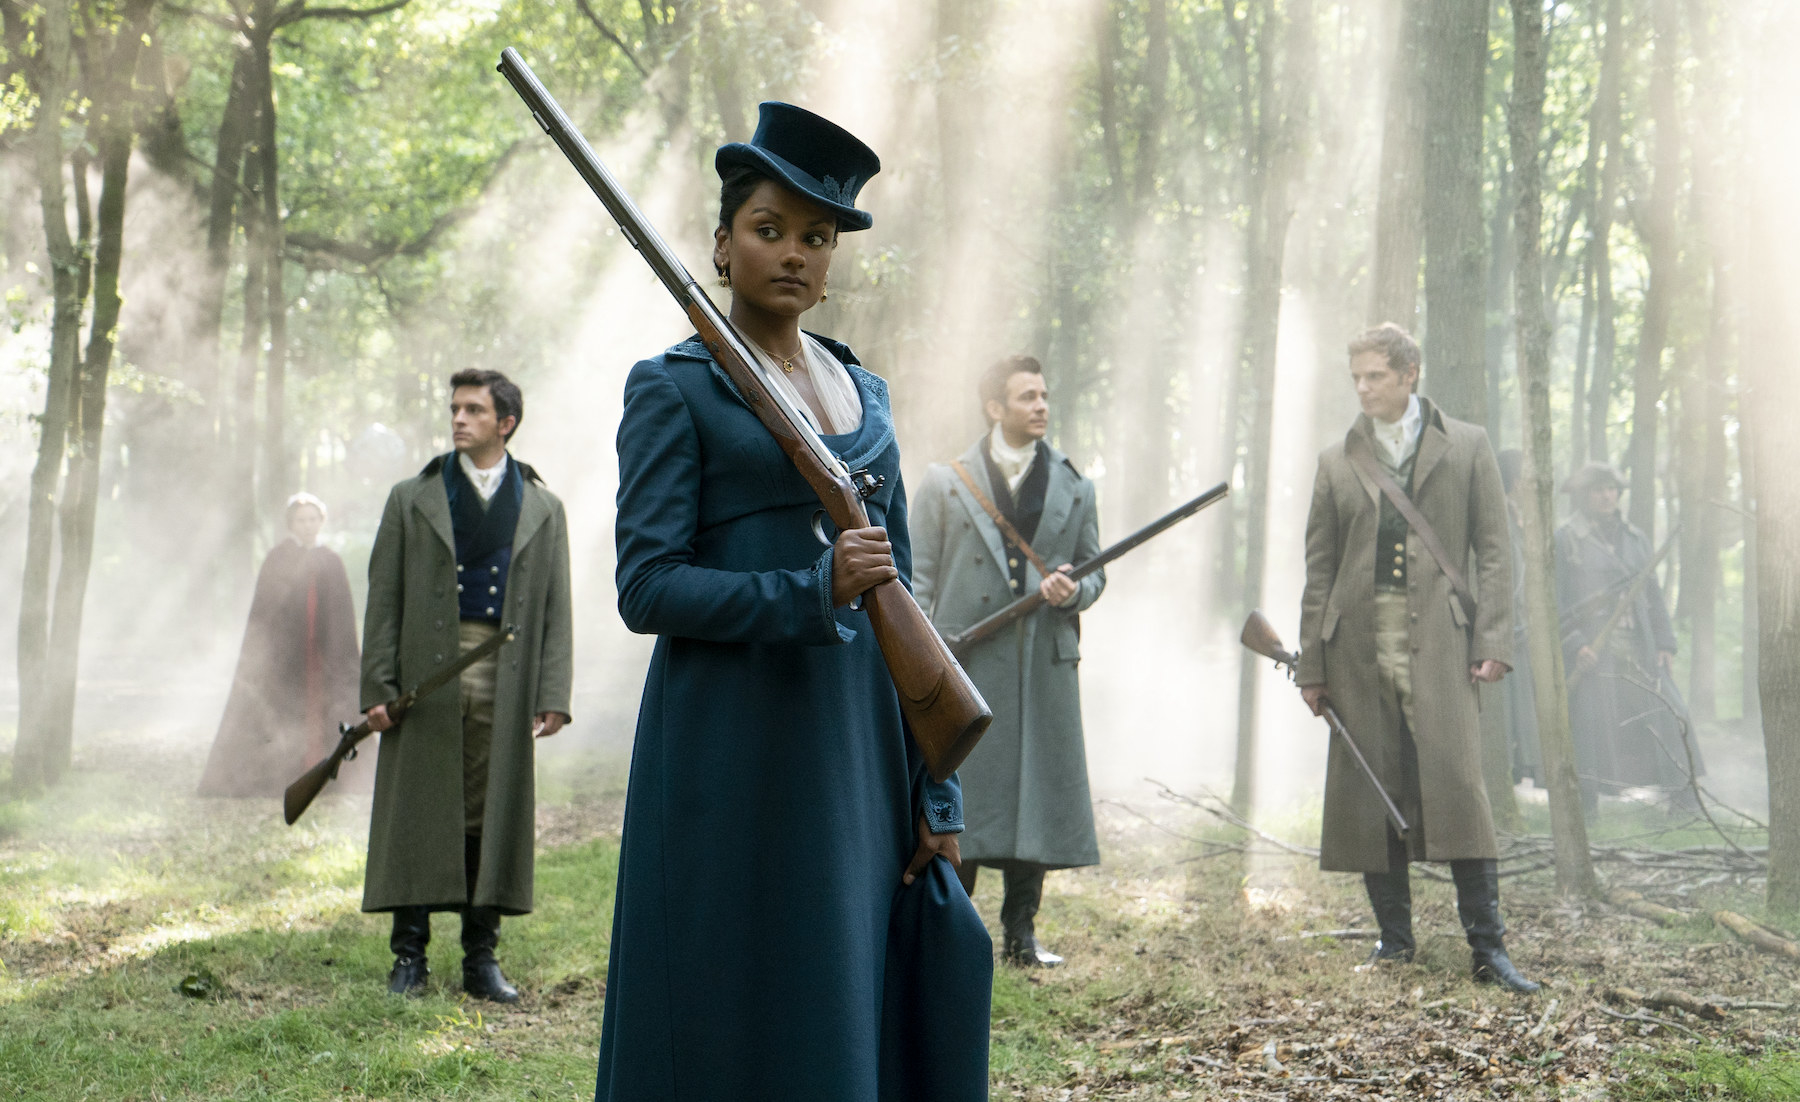 Kate with a rifle on her shoulder with men standing behind her